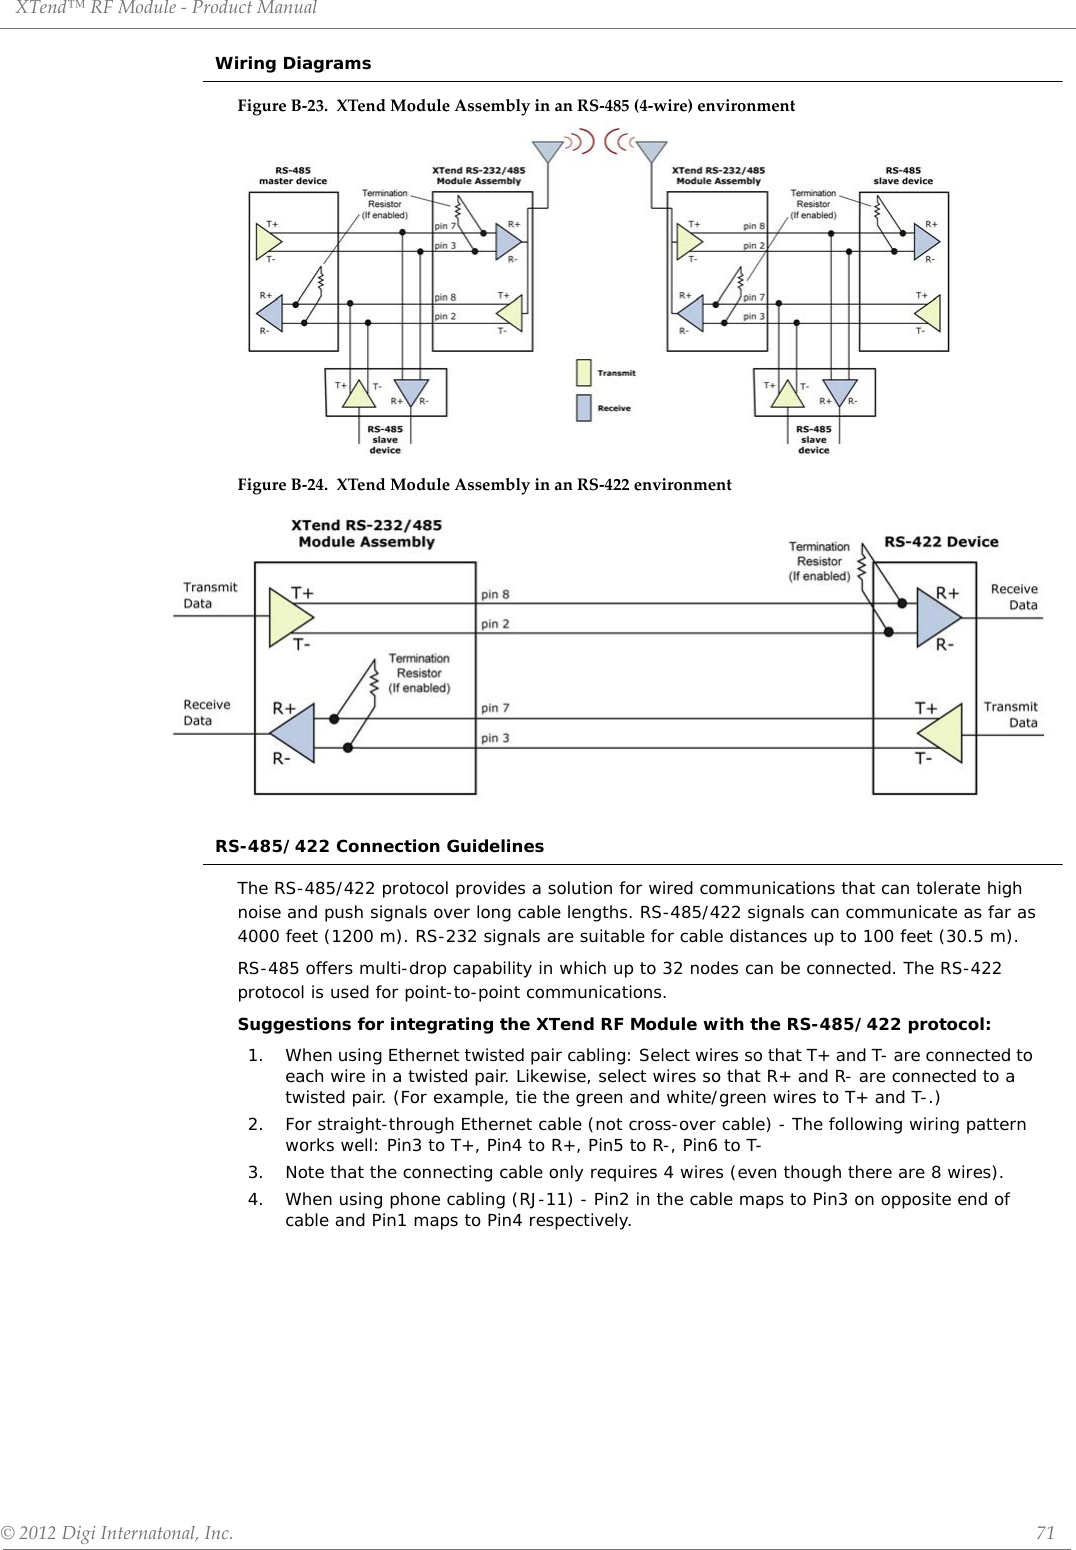 XTend™ RF Module - Product Manual © 2012 Digi Internatonal, Inc.      71Wiring DiagramsFigure B-23.  XTend Module Assembly in an RS-485 (4-wire) environmentFigure B-24.  XTend Module Assembly in an RS-422 environmentRS-485/422 Connection GuidelinesThe RS-485/422 protocol provides a solution for wired communications that can tolerate high noise and push signals over long cable lengths. RS-485/422 signals can communicate as far as 4000 feet (1200 m). RS-232 signals are suitable for cable distances up to 100 feet (30.5 m).RS-485 offers multi-drop capability in which up to 32 nodes can be connected. The RS-422 protocol is used for point-to-point communications.Suggestions for integrating the XTend RF Module with the RS-485/422 protocol:1. When using Ethernet twisted pair cabling: Select wires so that T+ and T- are connected to each wire in a twisted pair. Likewise, select wires so that R+ and R- are connected to a twisted pair. (For example, tie the green and white/green wires to T+ and T-.)2. For straight-through Ethernet cable (not cross-over cable) - The following wiring pattern works well: Pin3 to T+, Pin4 to R+, Pin5 to R-, Pin6 to T-3. Note that the connecting cable only requires 4 wires (even though there are 8 wires).4. When using phone cabling (RJ-11) - Pin2 in the cable maps to Pin3 on opposite end of cable and Pin1 maps to Pin4 respectively.